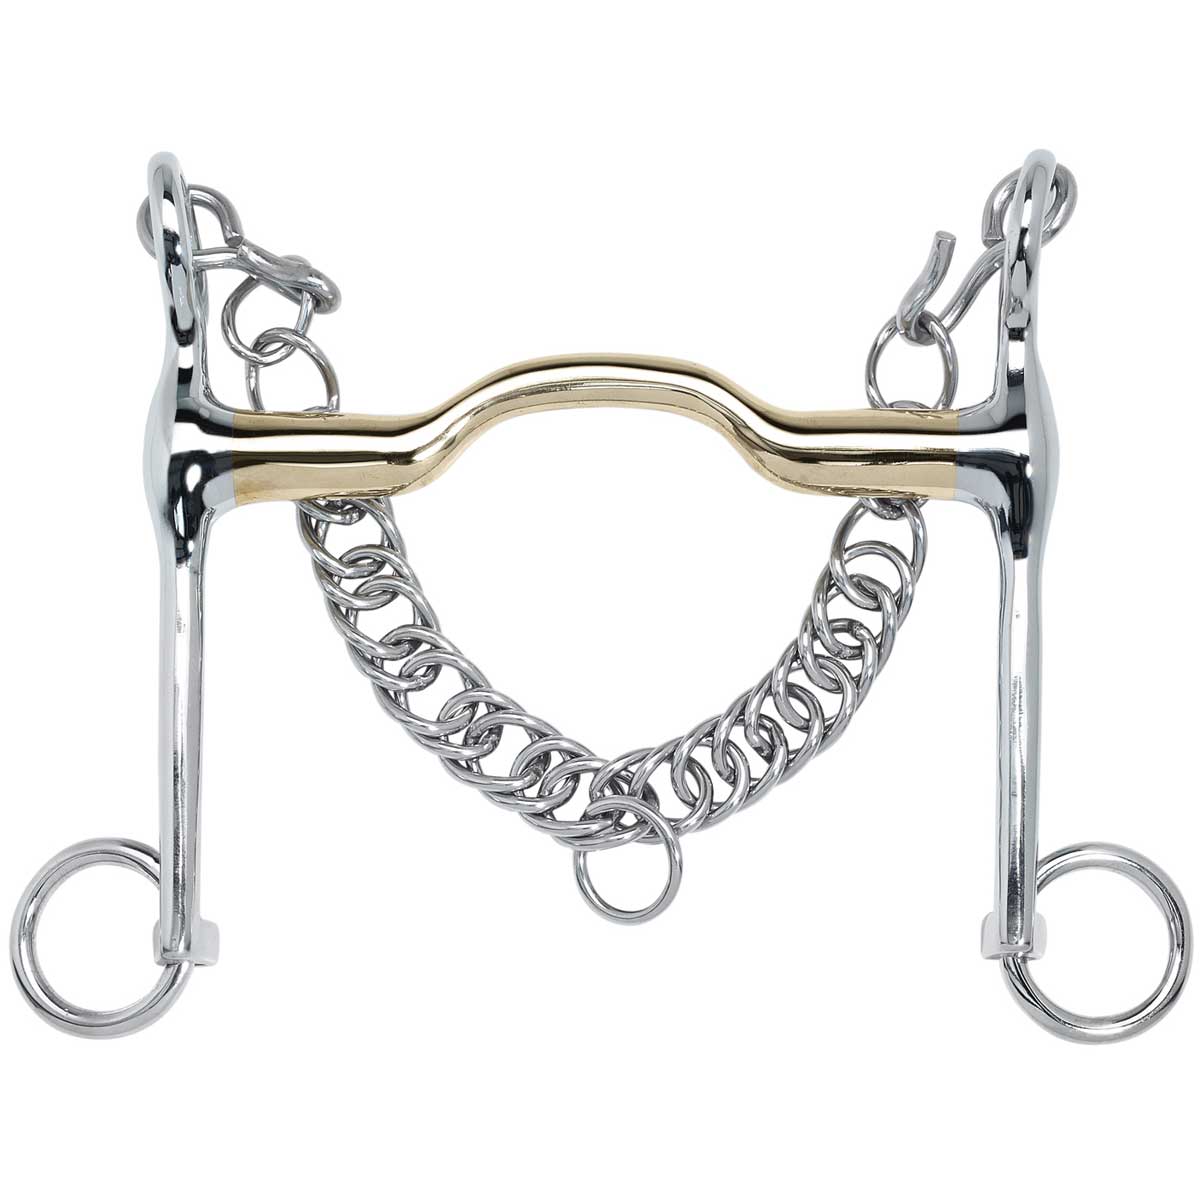 BUSSE Double Bridle KAUGAN®, stainless steel bars